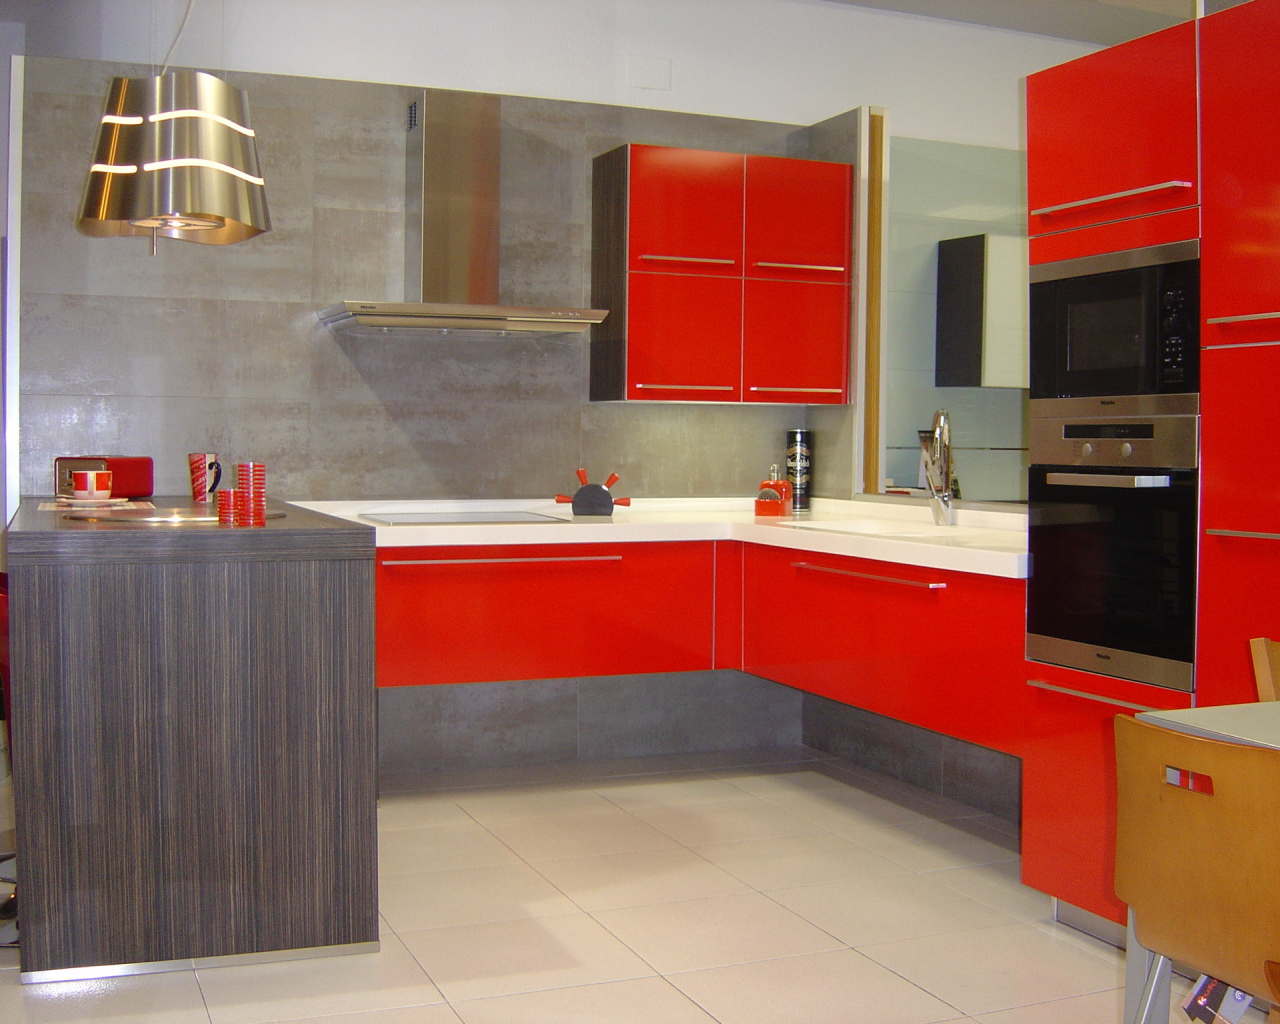 Gray and red color in the kitchen